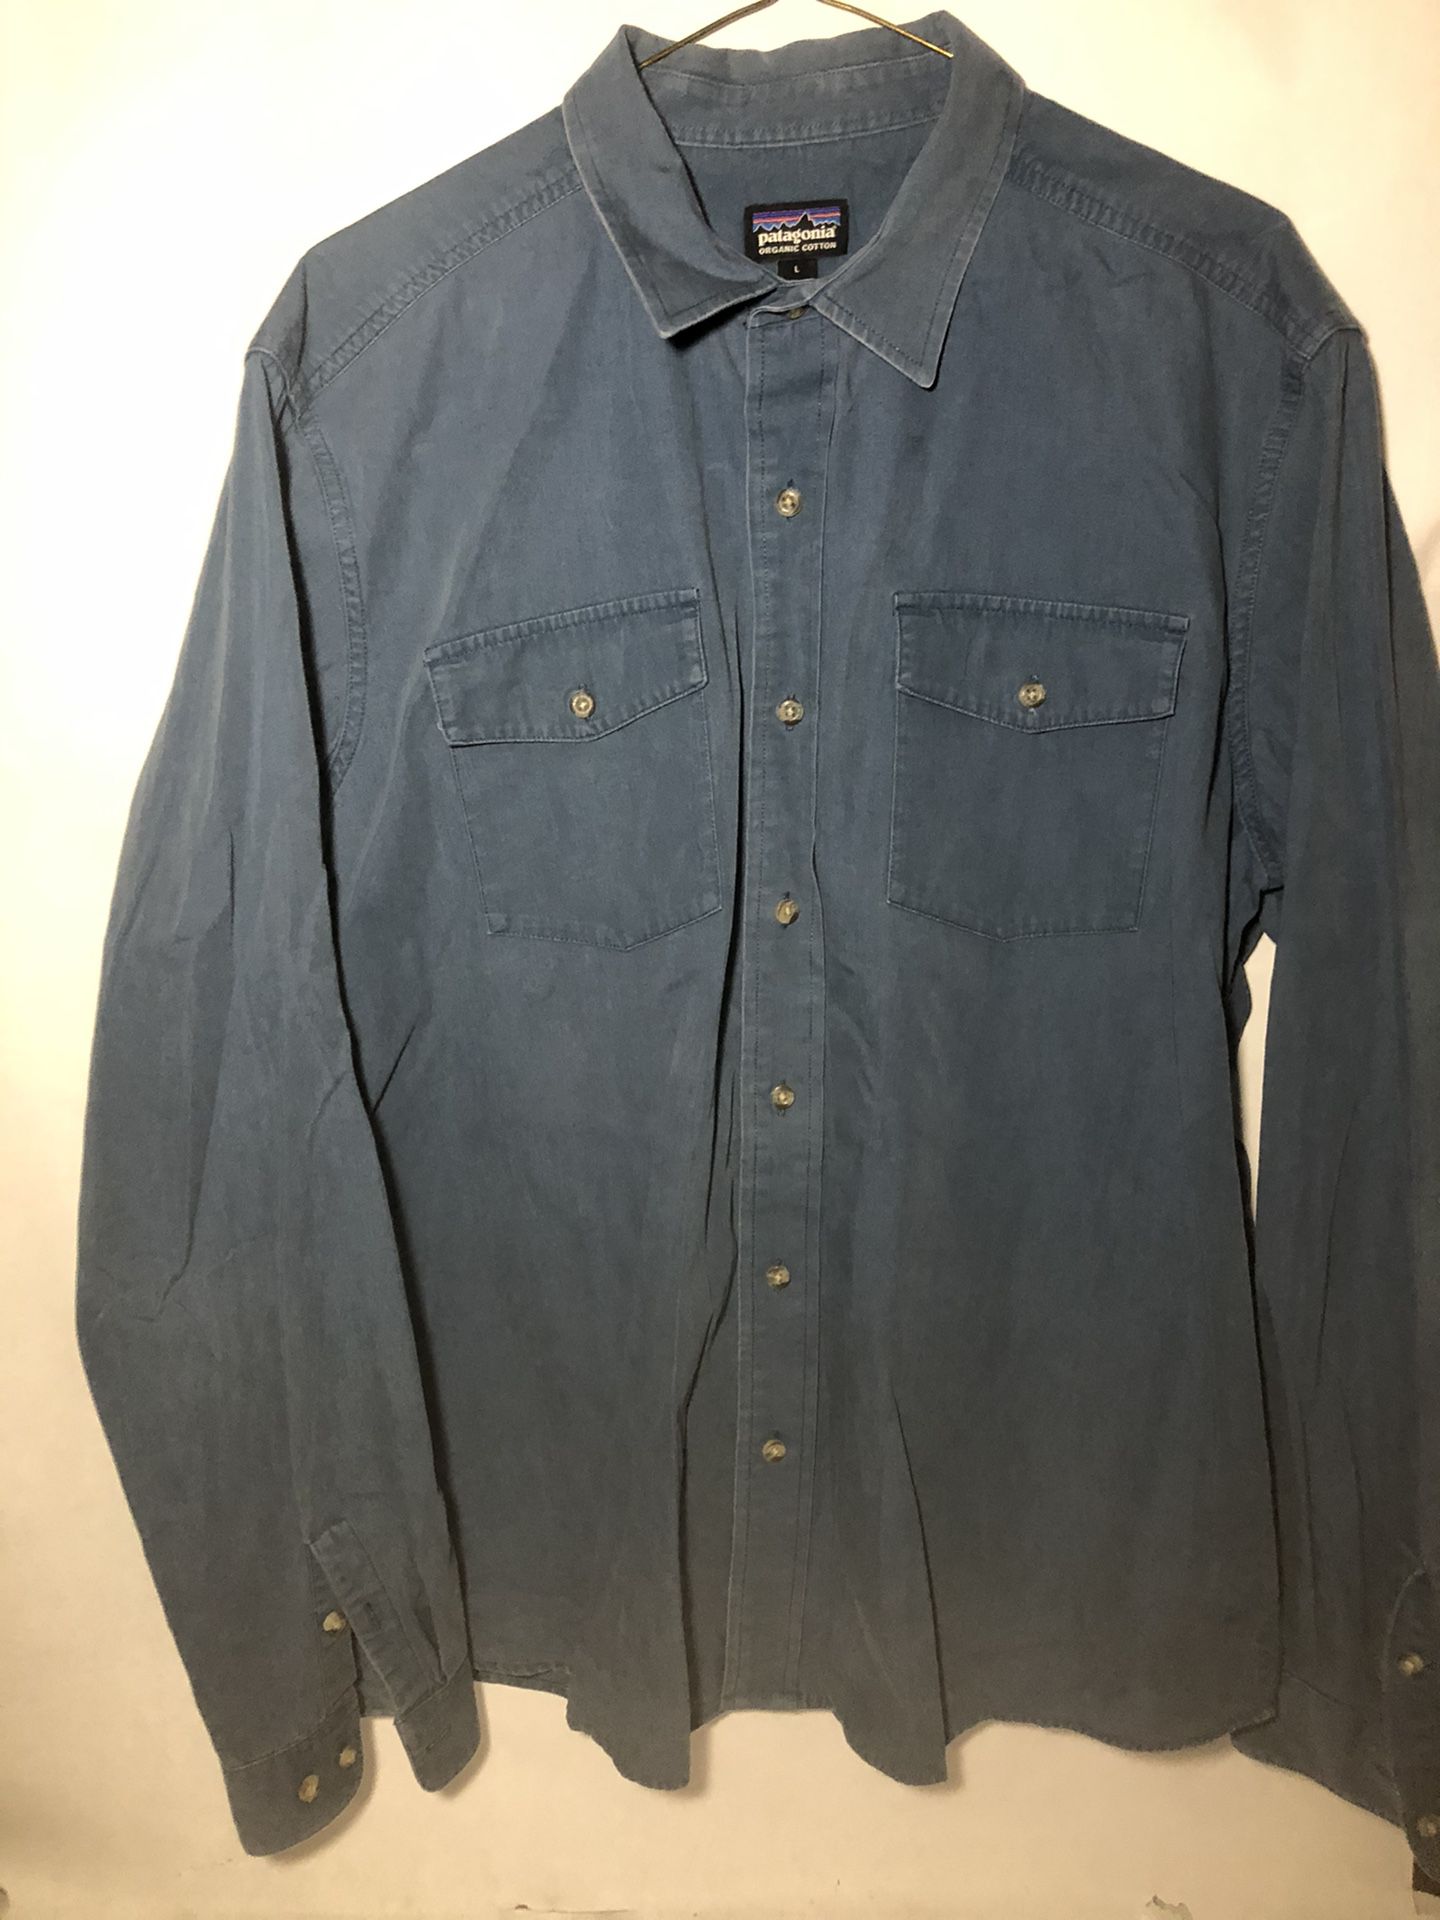 Patagonia Mens Organic Cotton Long Sleeve Button Front Shirt Size Large